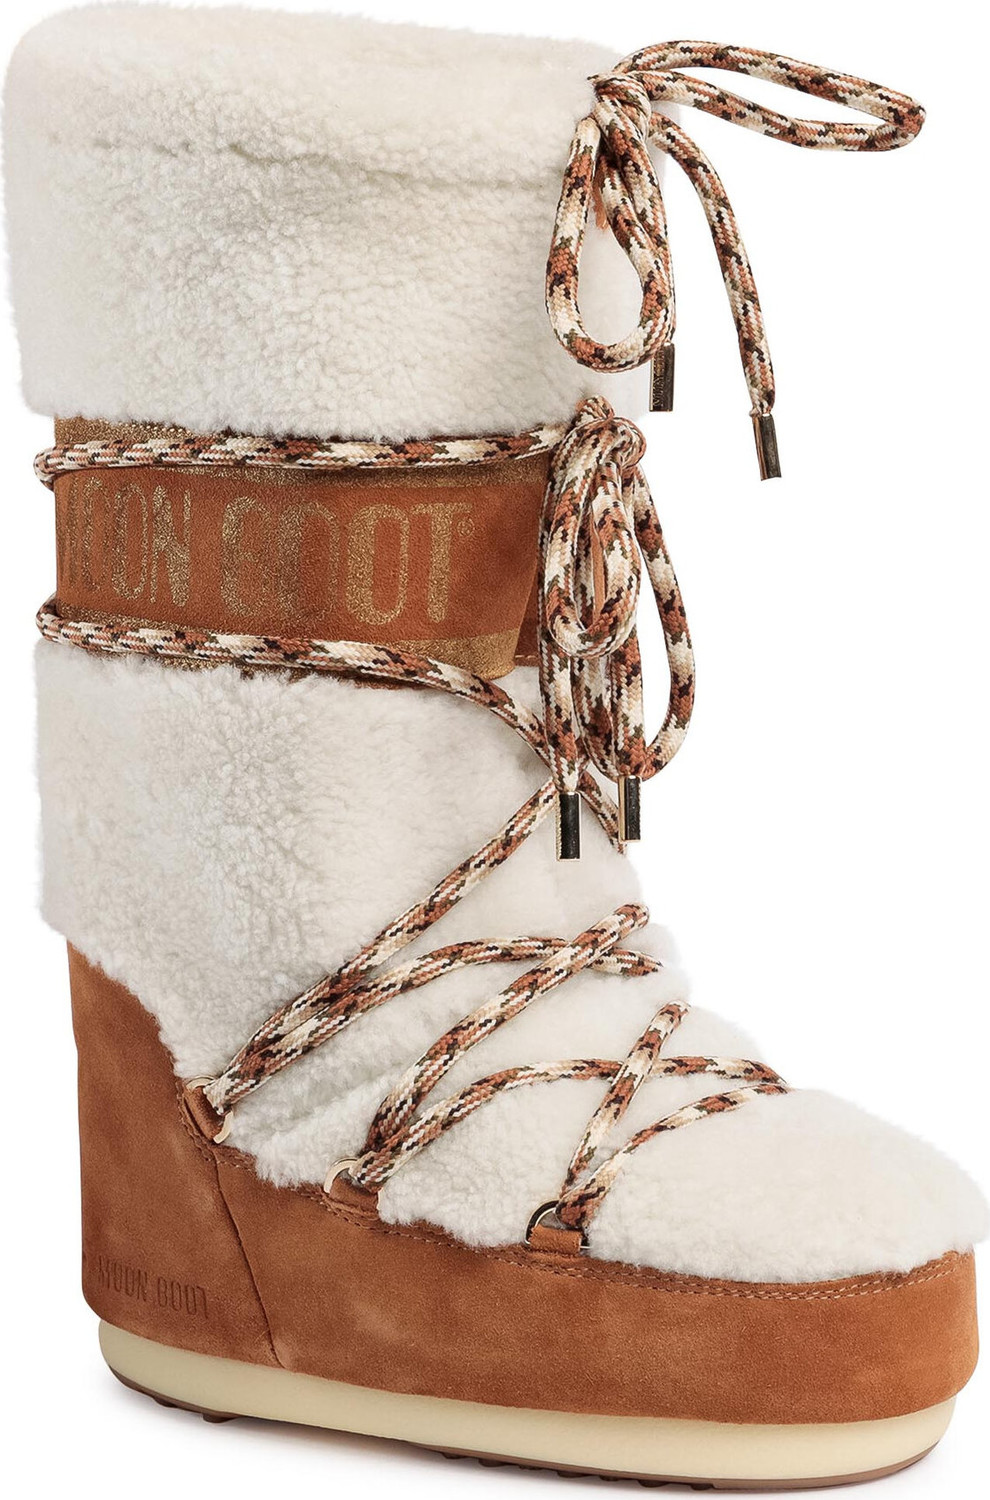 Snehule Moon Boot Shearling 14026100001 Whisky/Off White